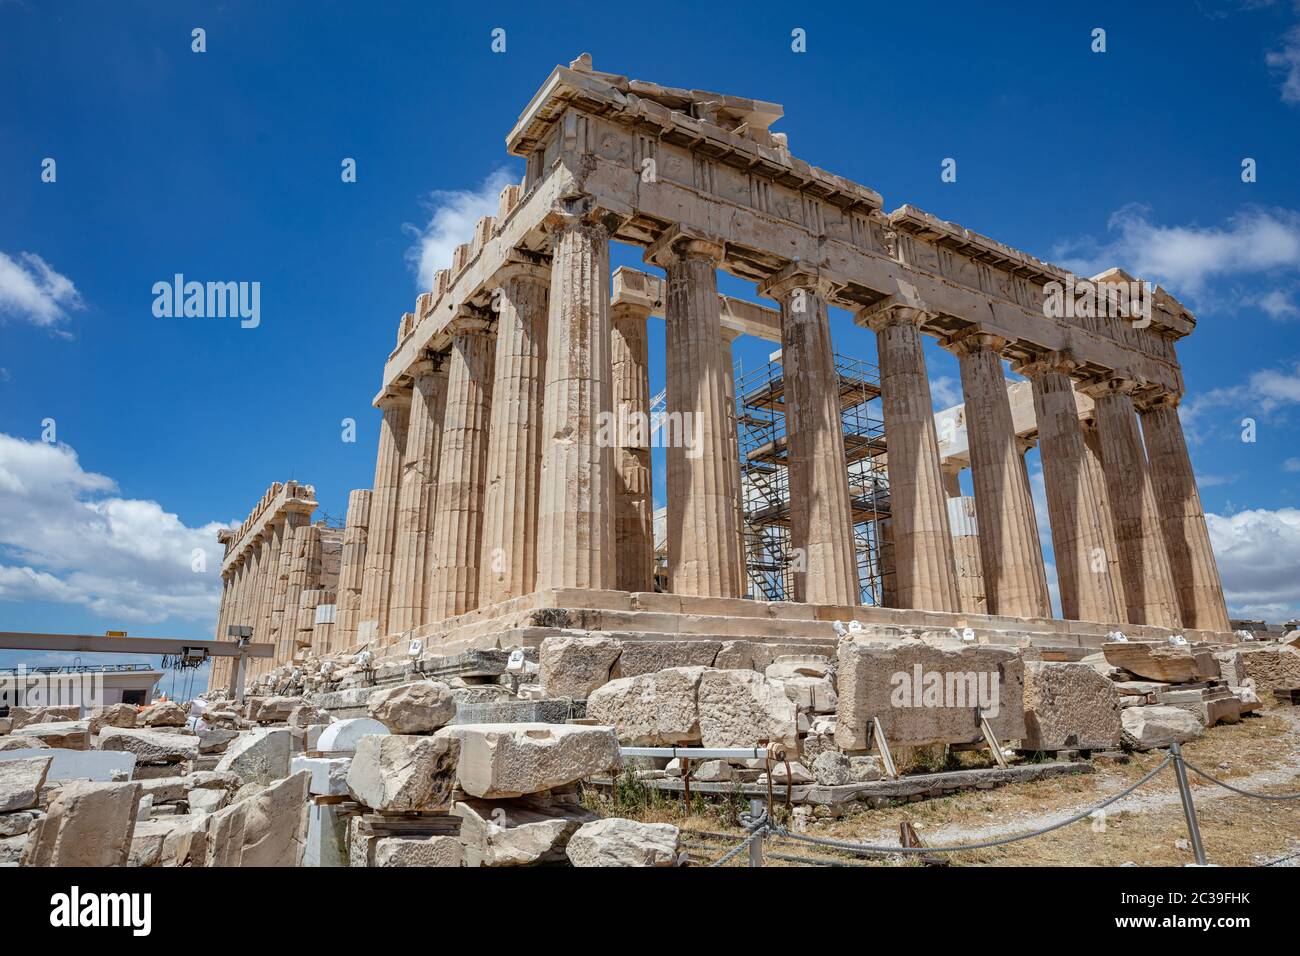 Athens Acropolis, Greece. Parthenon temple facade side view, ancient temple ruins, blue sky background in spring sunny day. Stock Photo